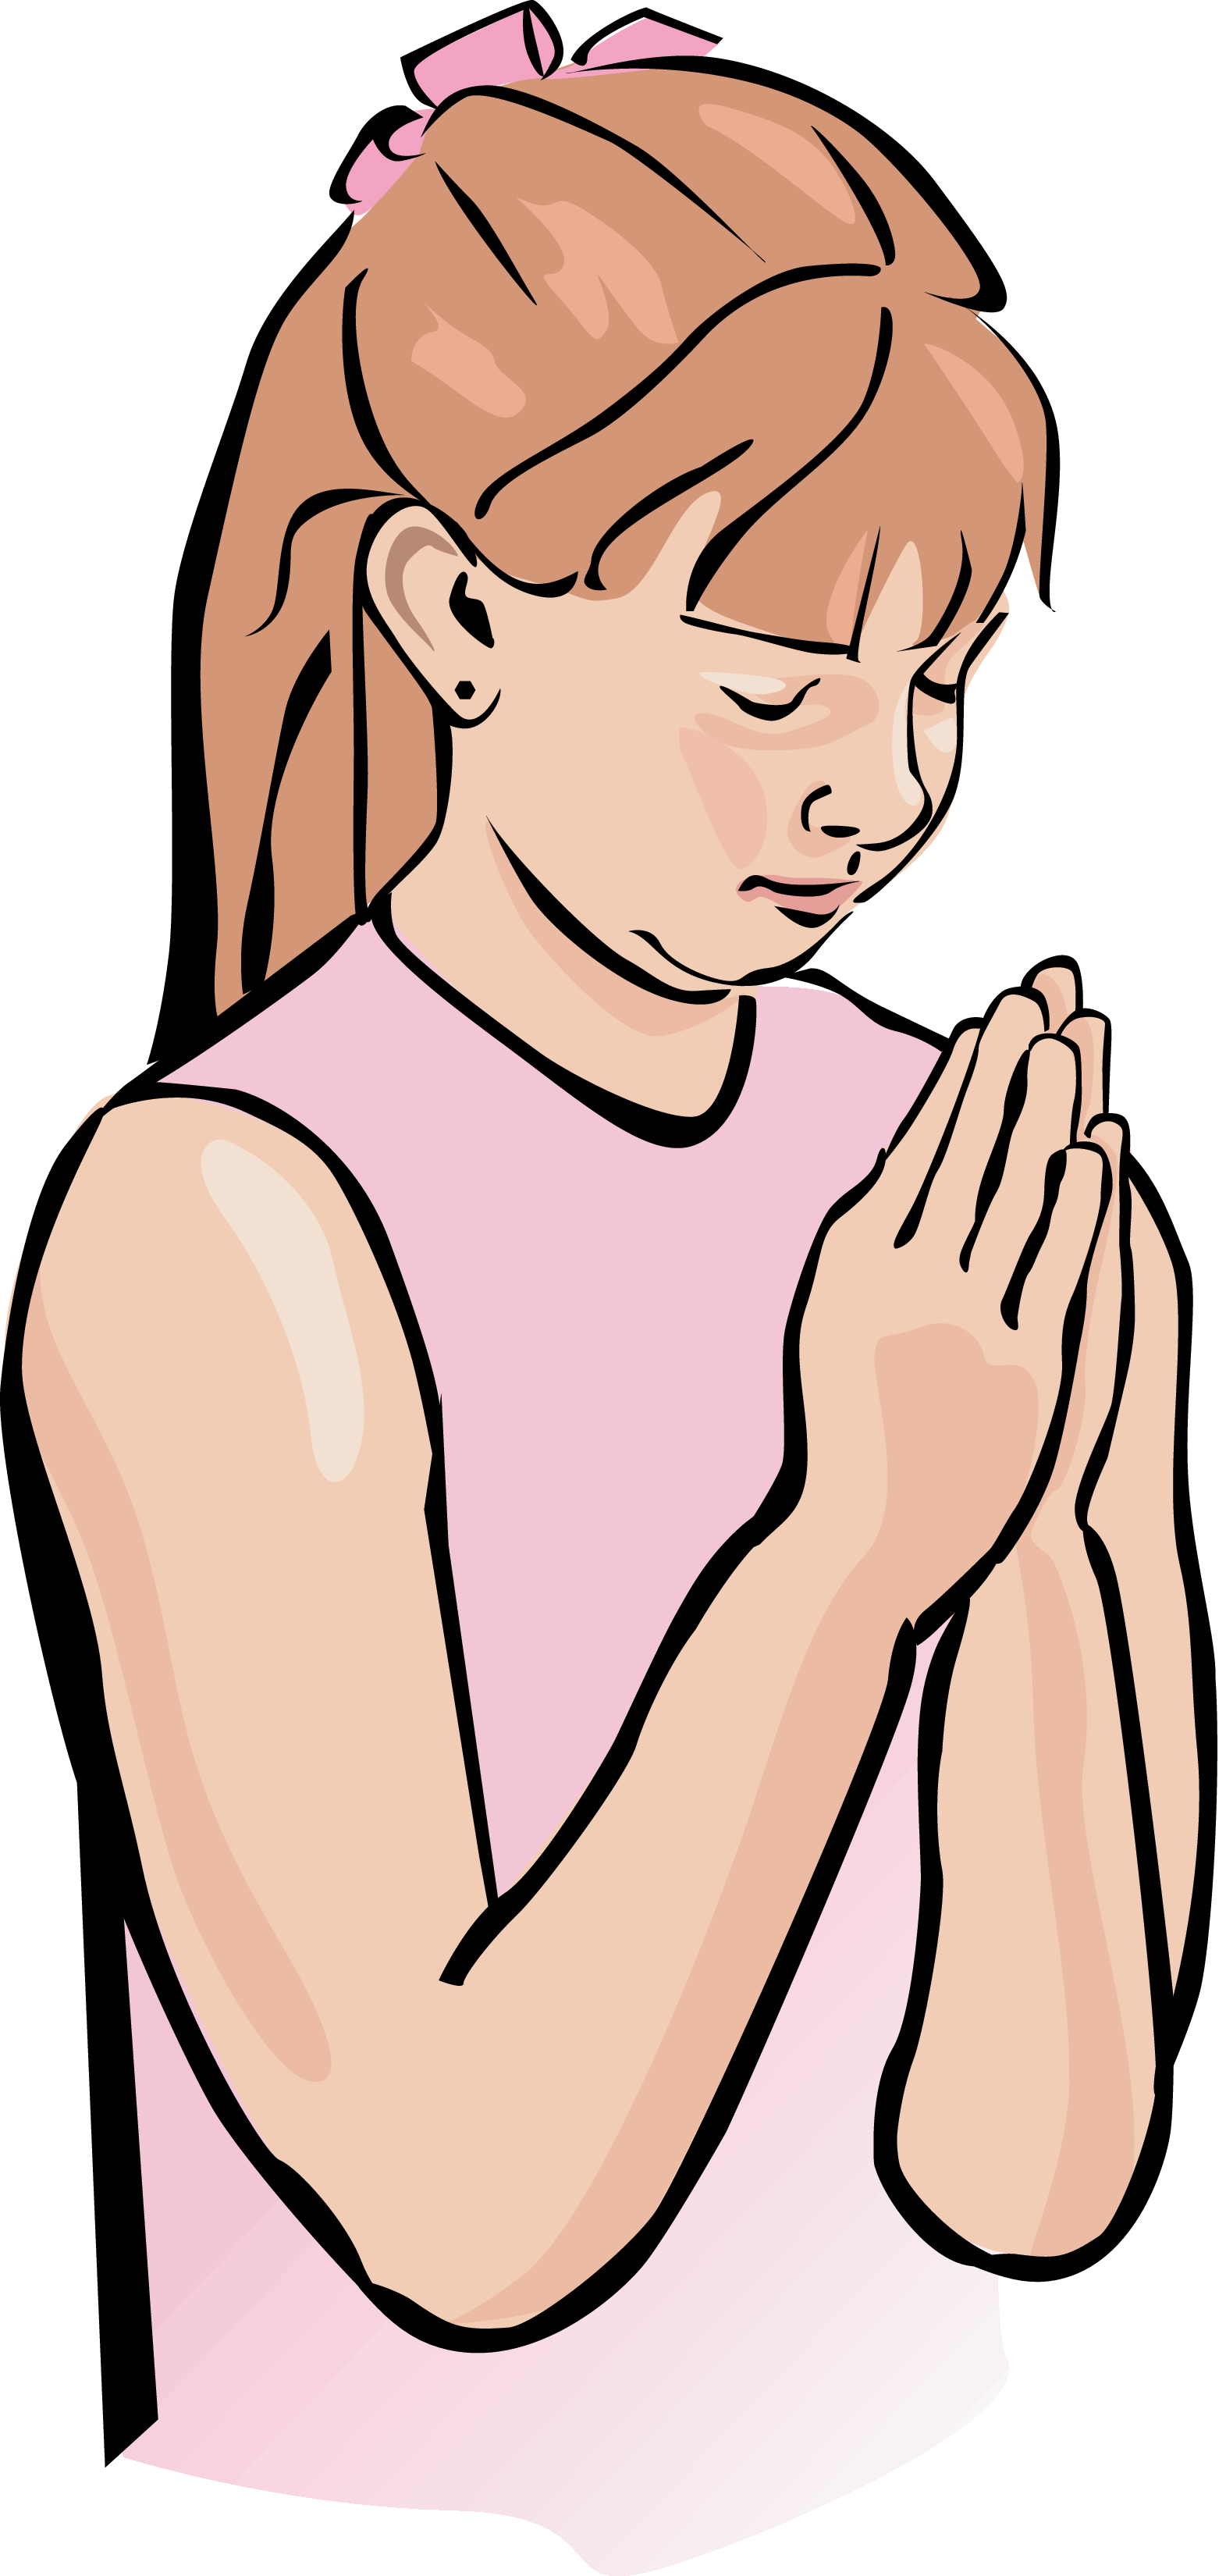 Child prayer clipart free clipart images 2